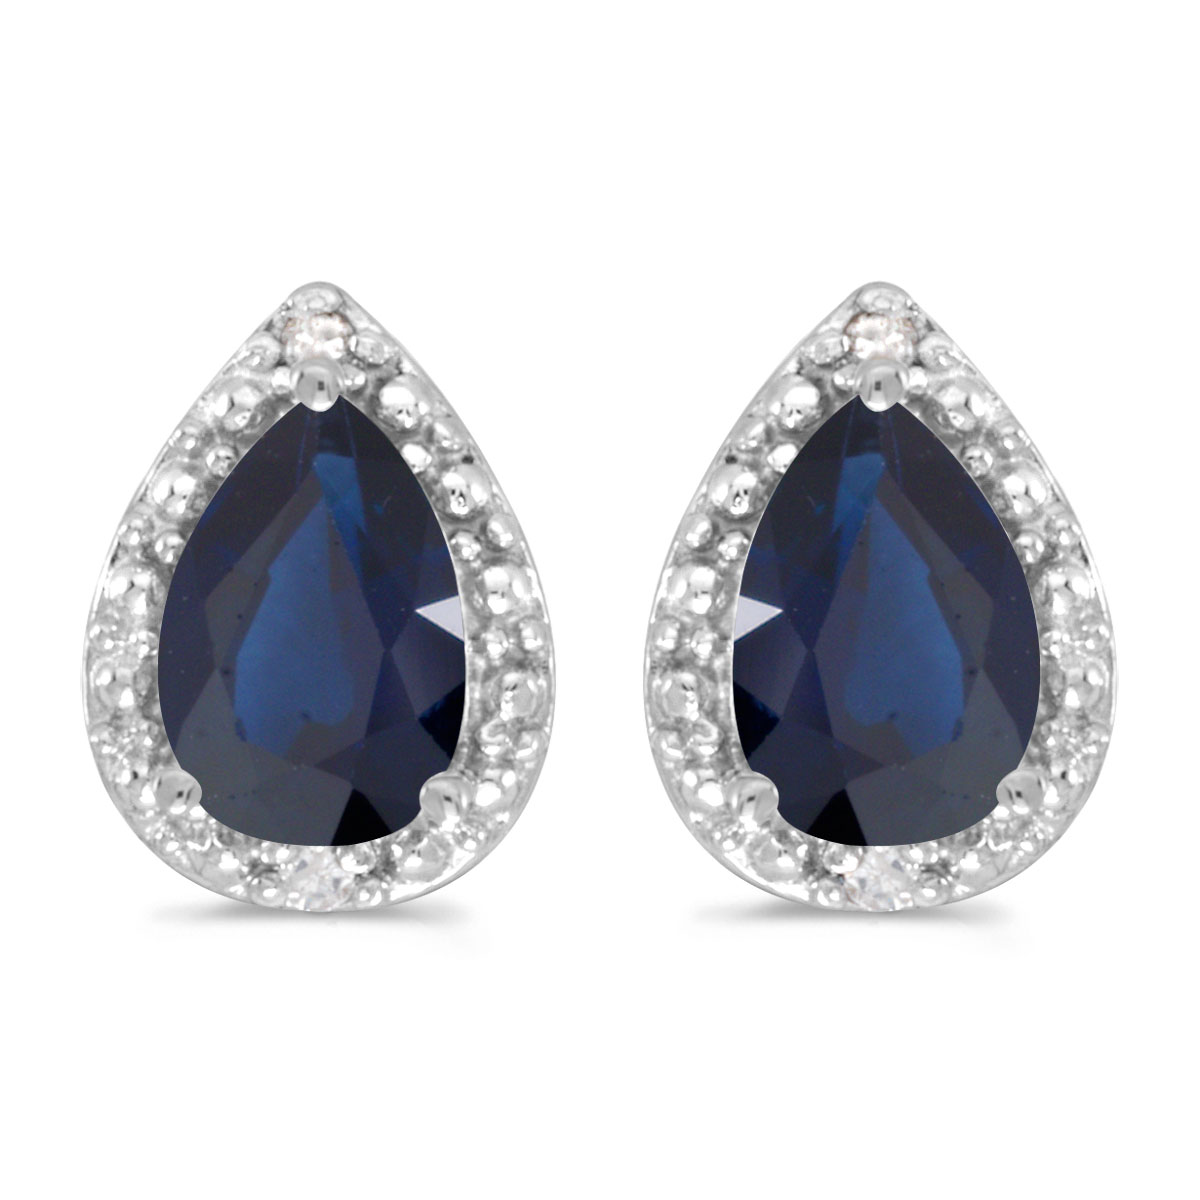 These 14k white gold pear sapphire and diamond earrings feature 6x4 mm genuine natural sapphires ...